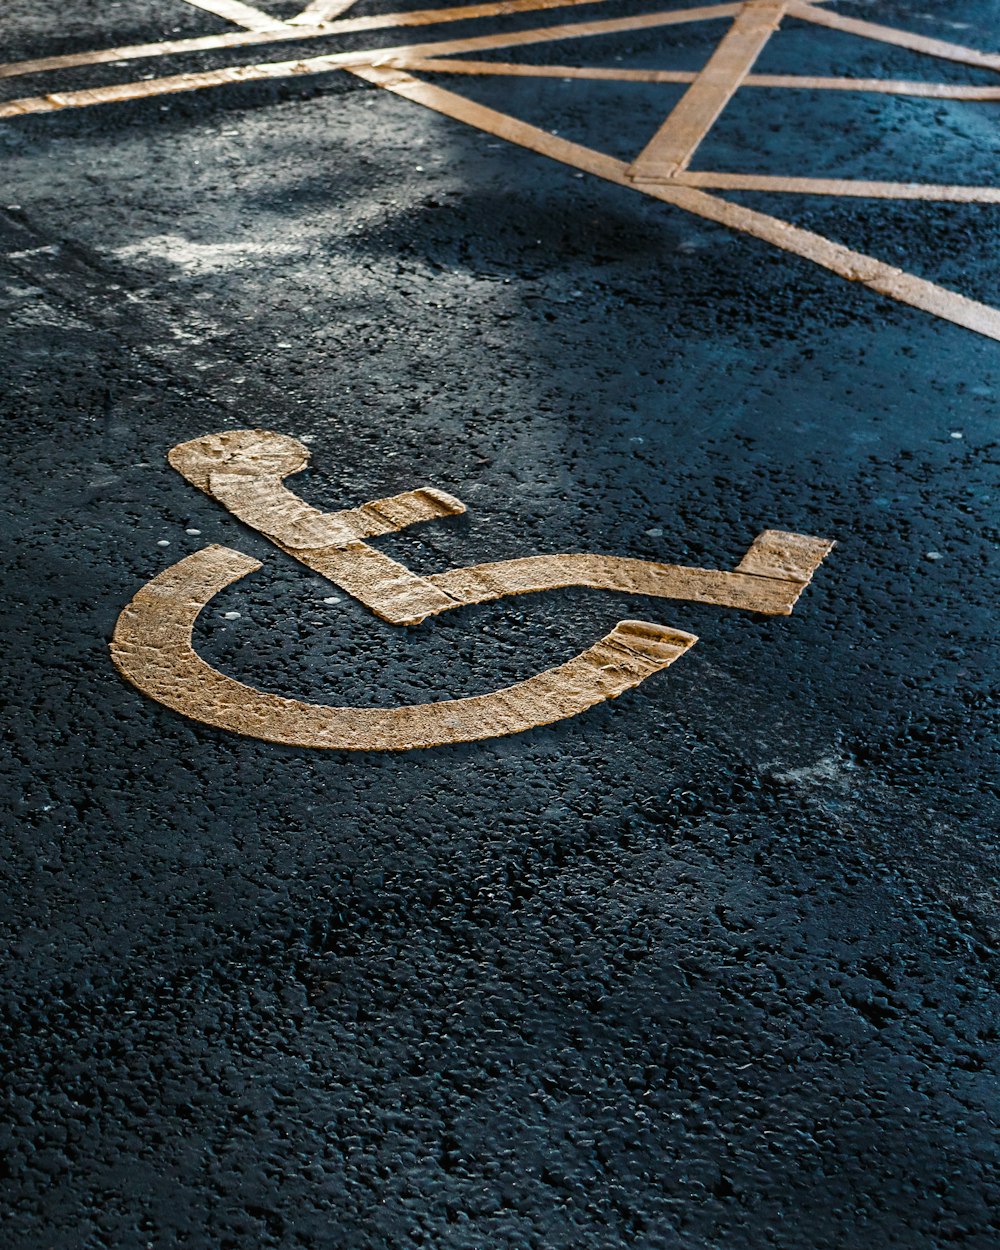 a handicapped sign on the ground in a parking lot